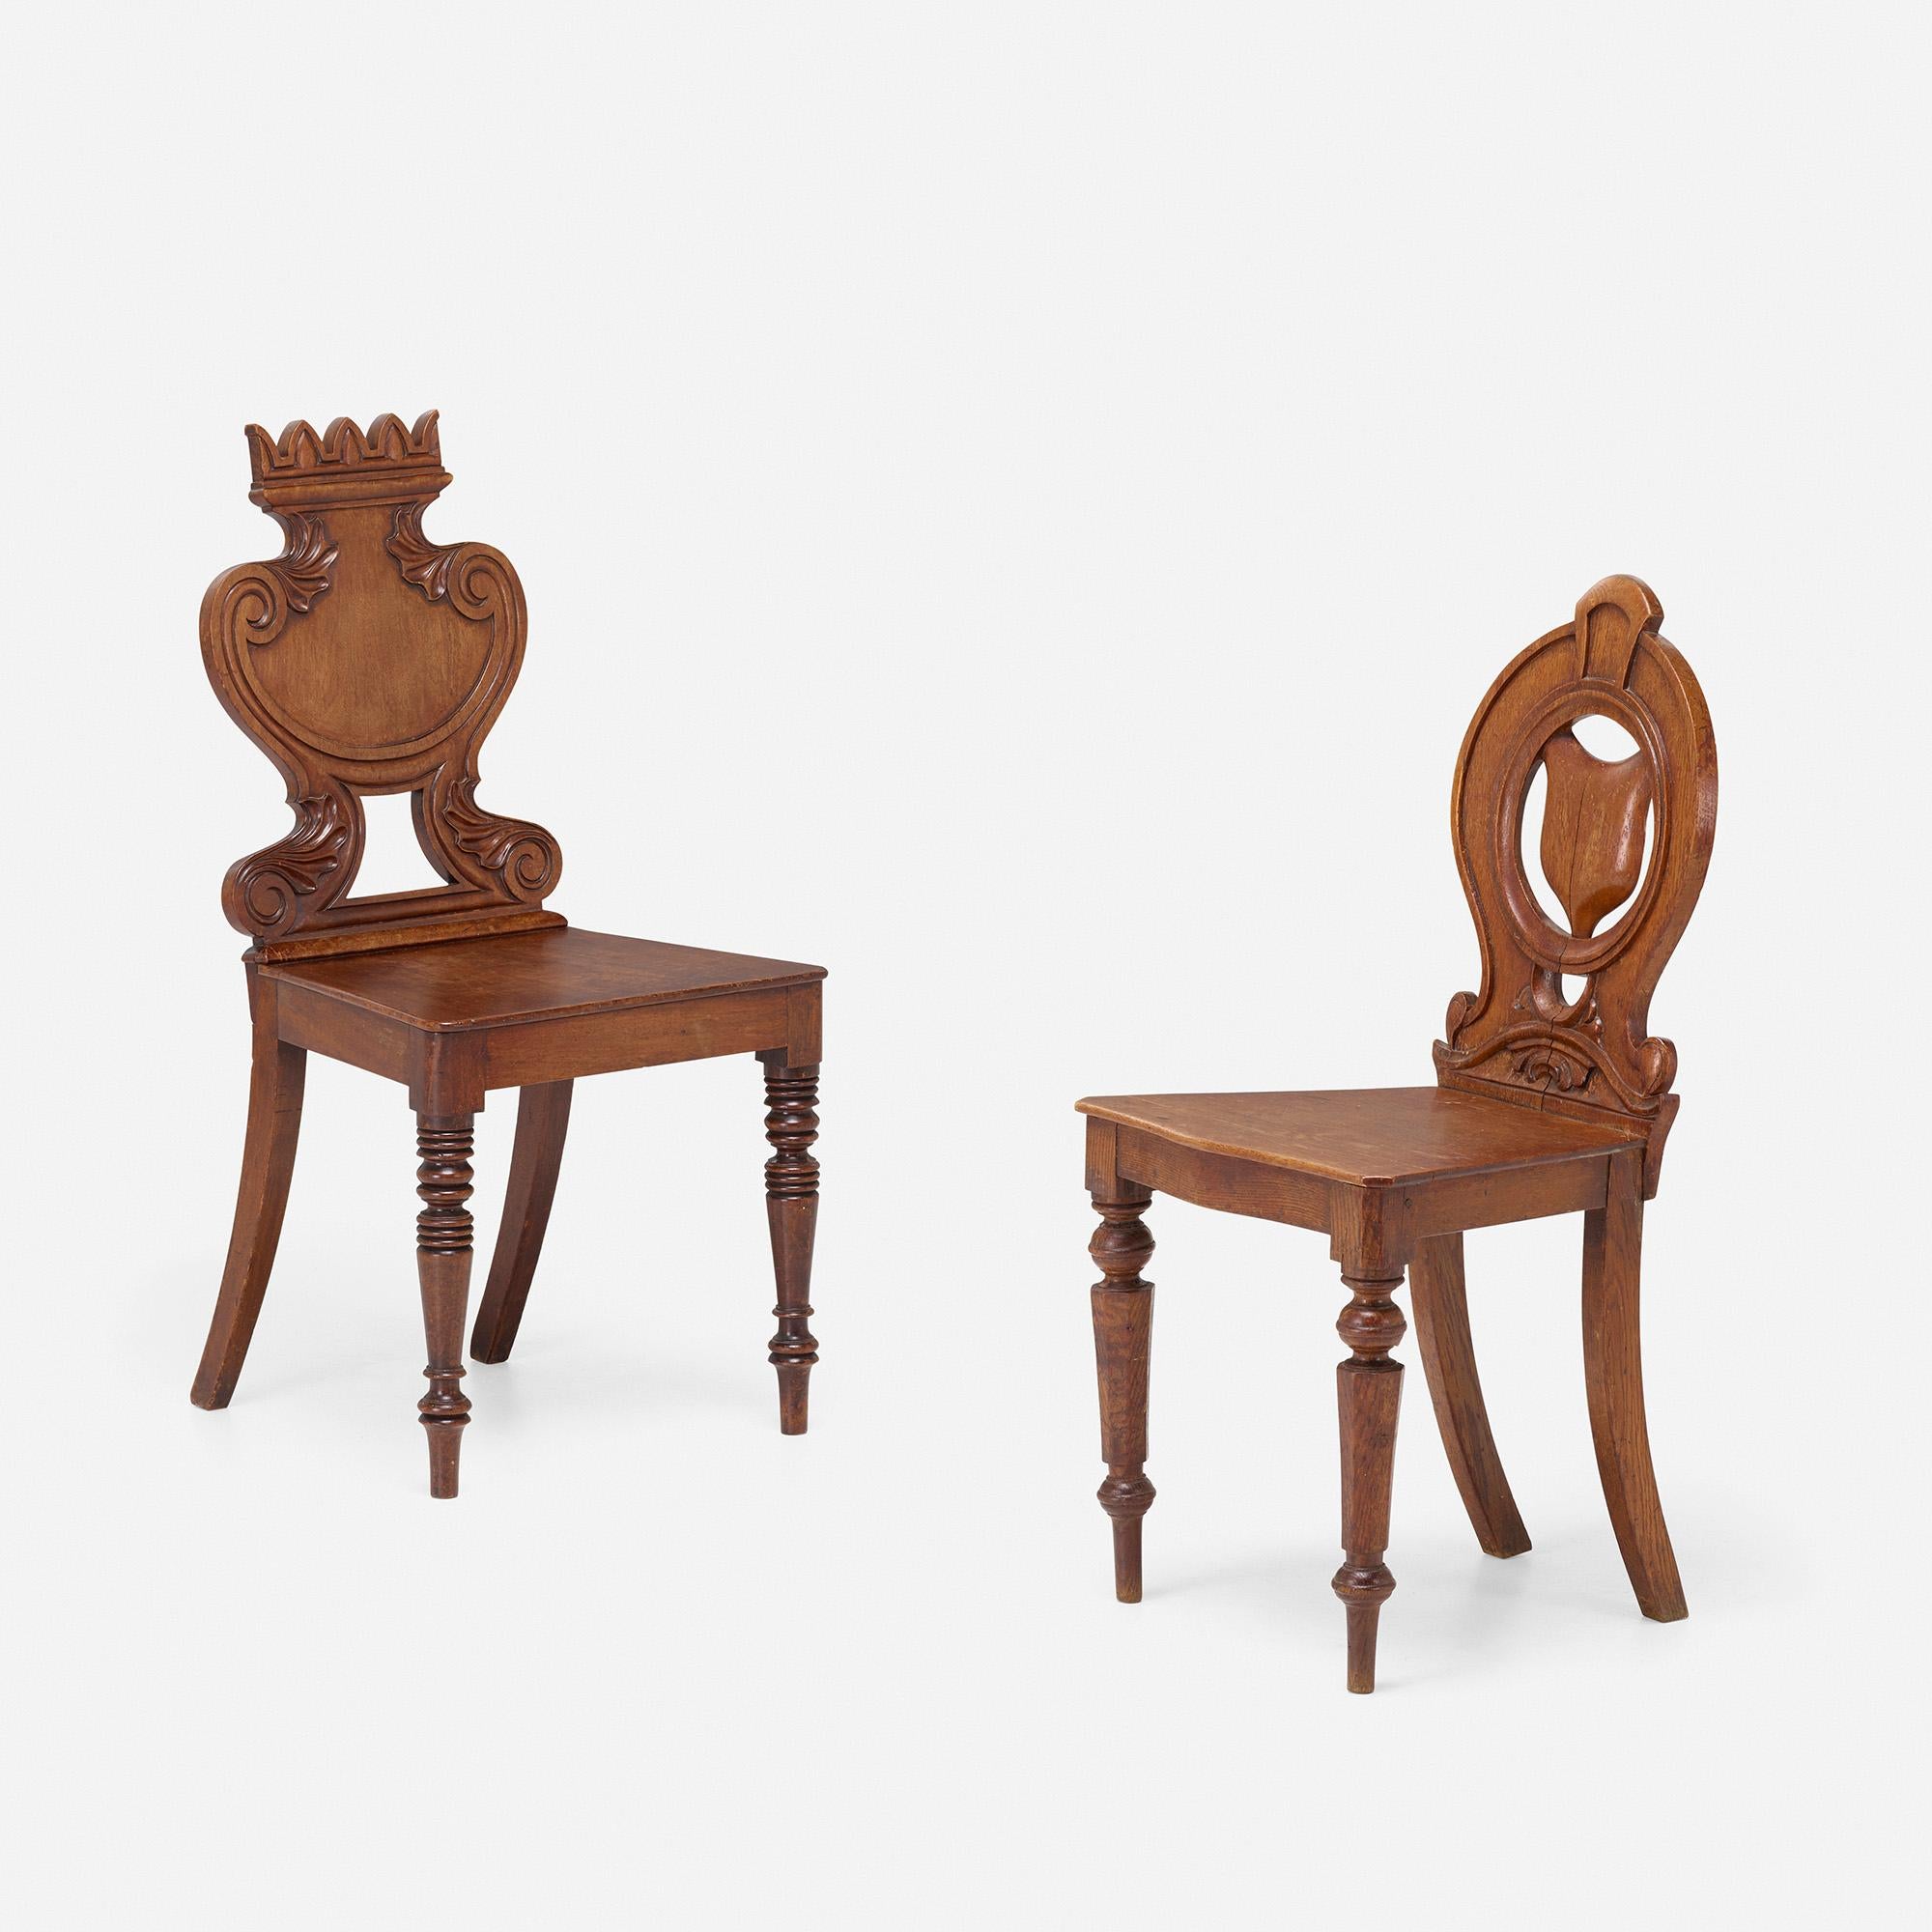 Created: c. 1850

Material: mahogany, oak

Size: 18 W × 19 D × 37 H in seat height 17 inches.